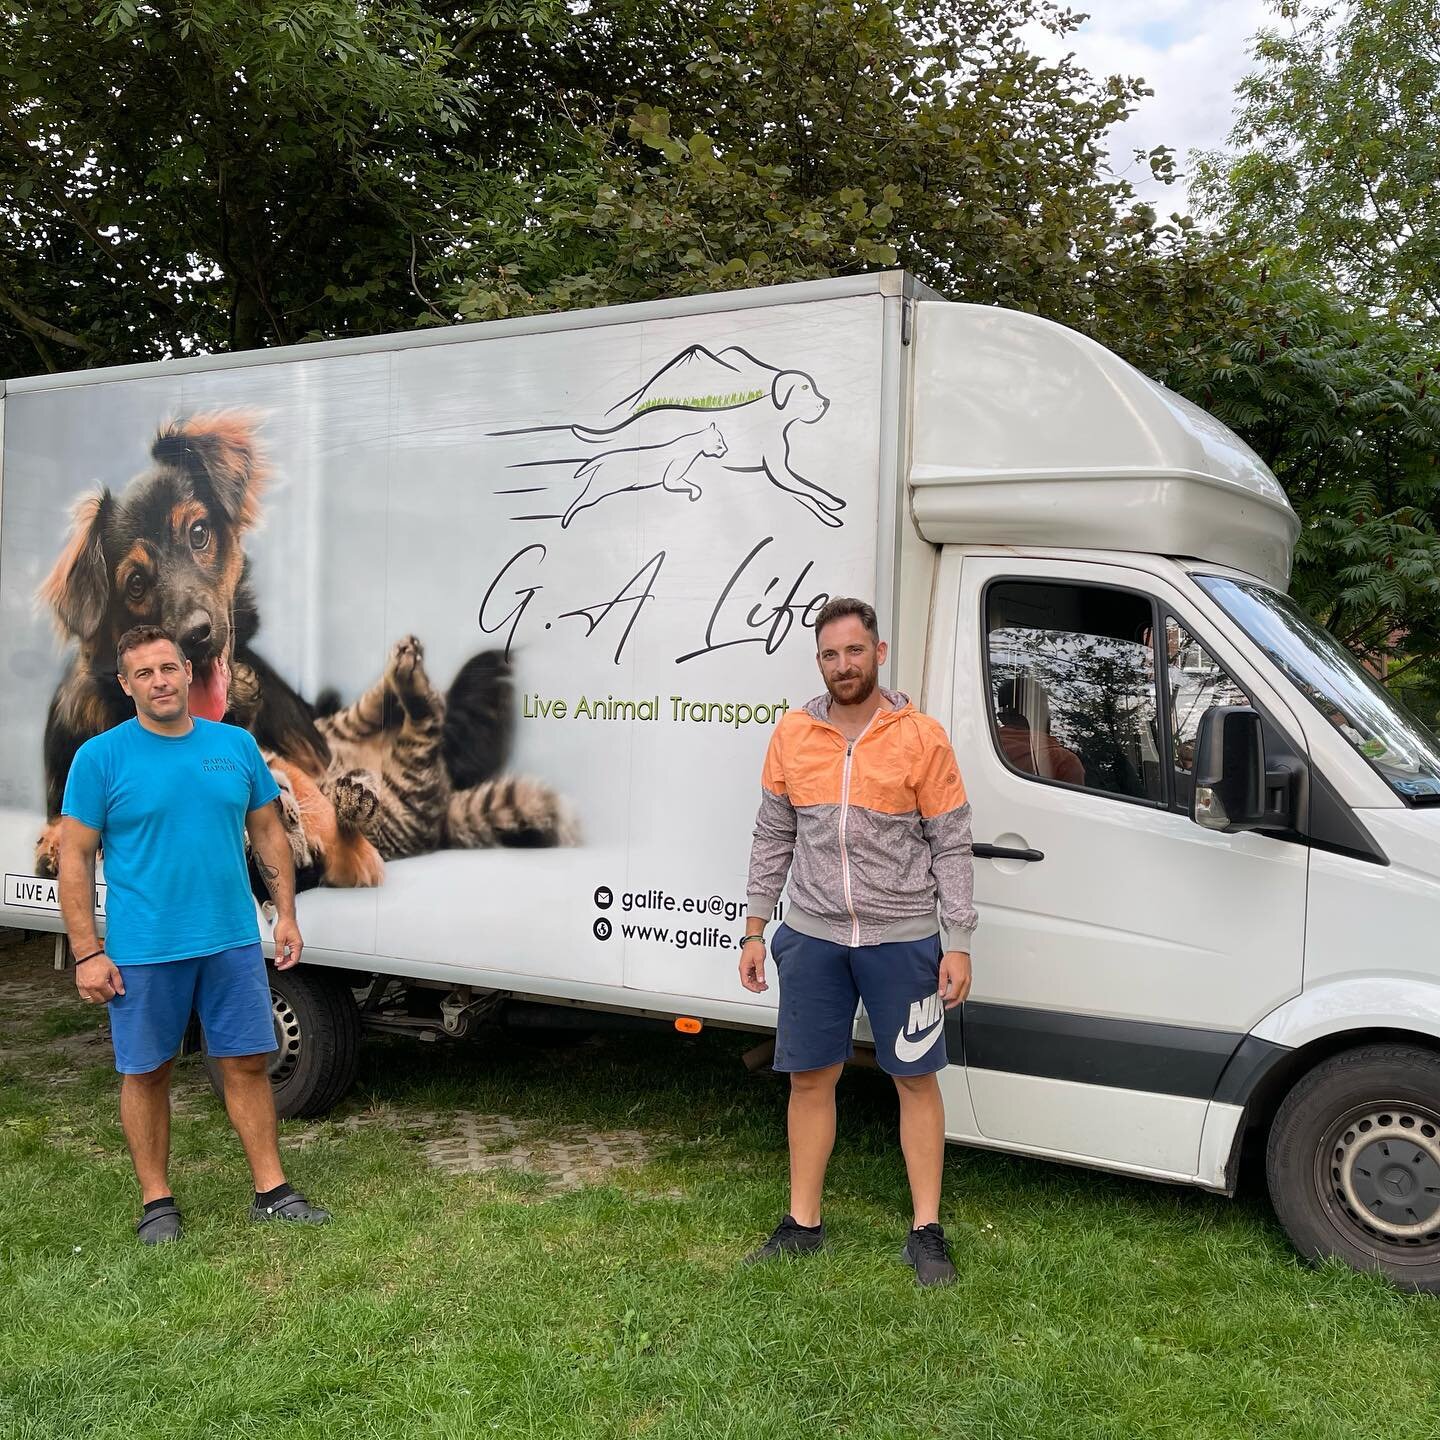 Thank you for this amazing transport with amazing cats &amp; dogs and great customers! We love our job and we love being part of awesome work. Have a great weekend! See you next weekend! Your G.A. Life Drivers Konstantinos and Ioannis 🙋🏻&zwj;♂️🙋🏻